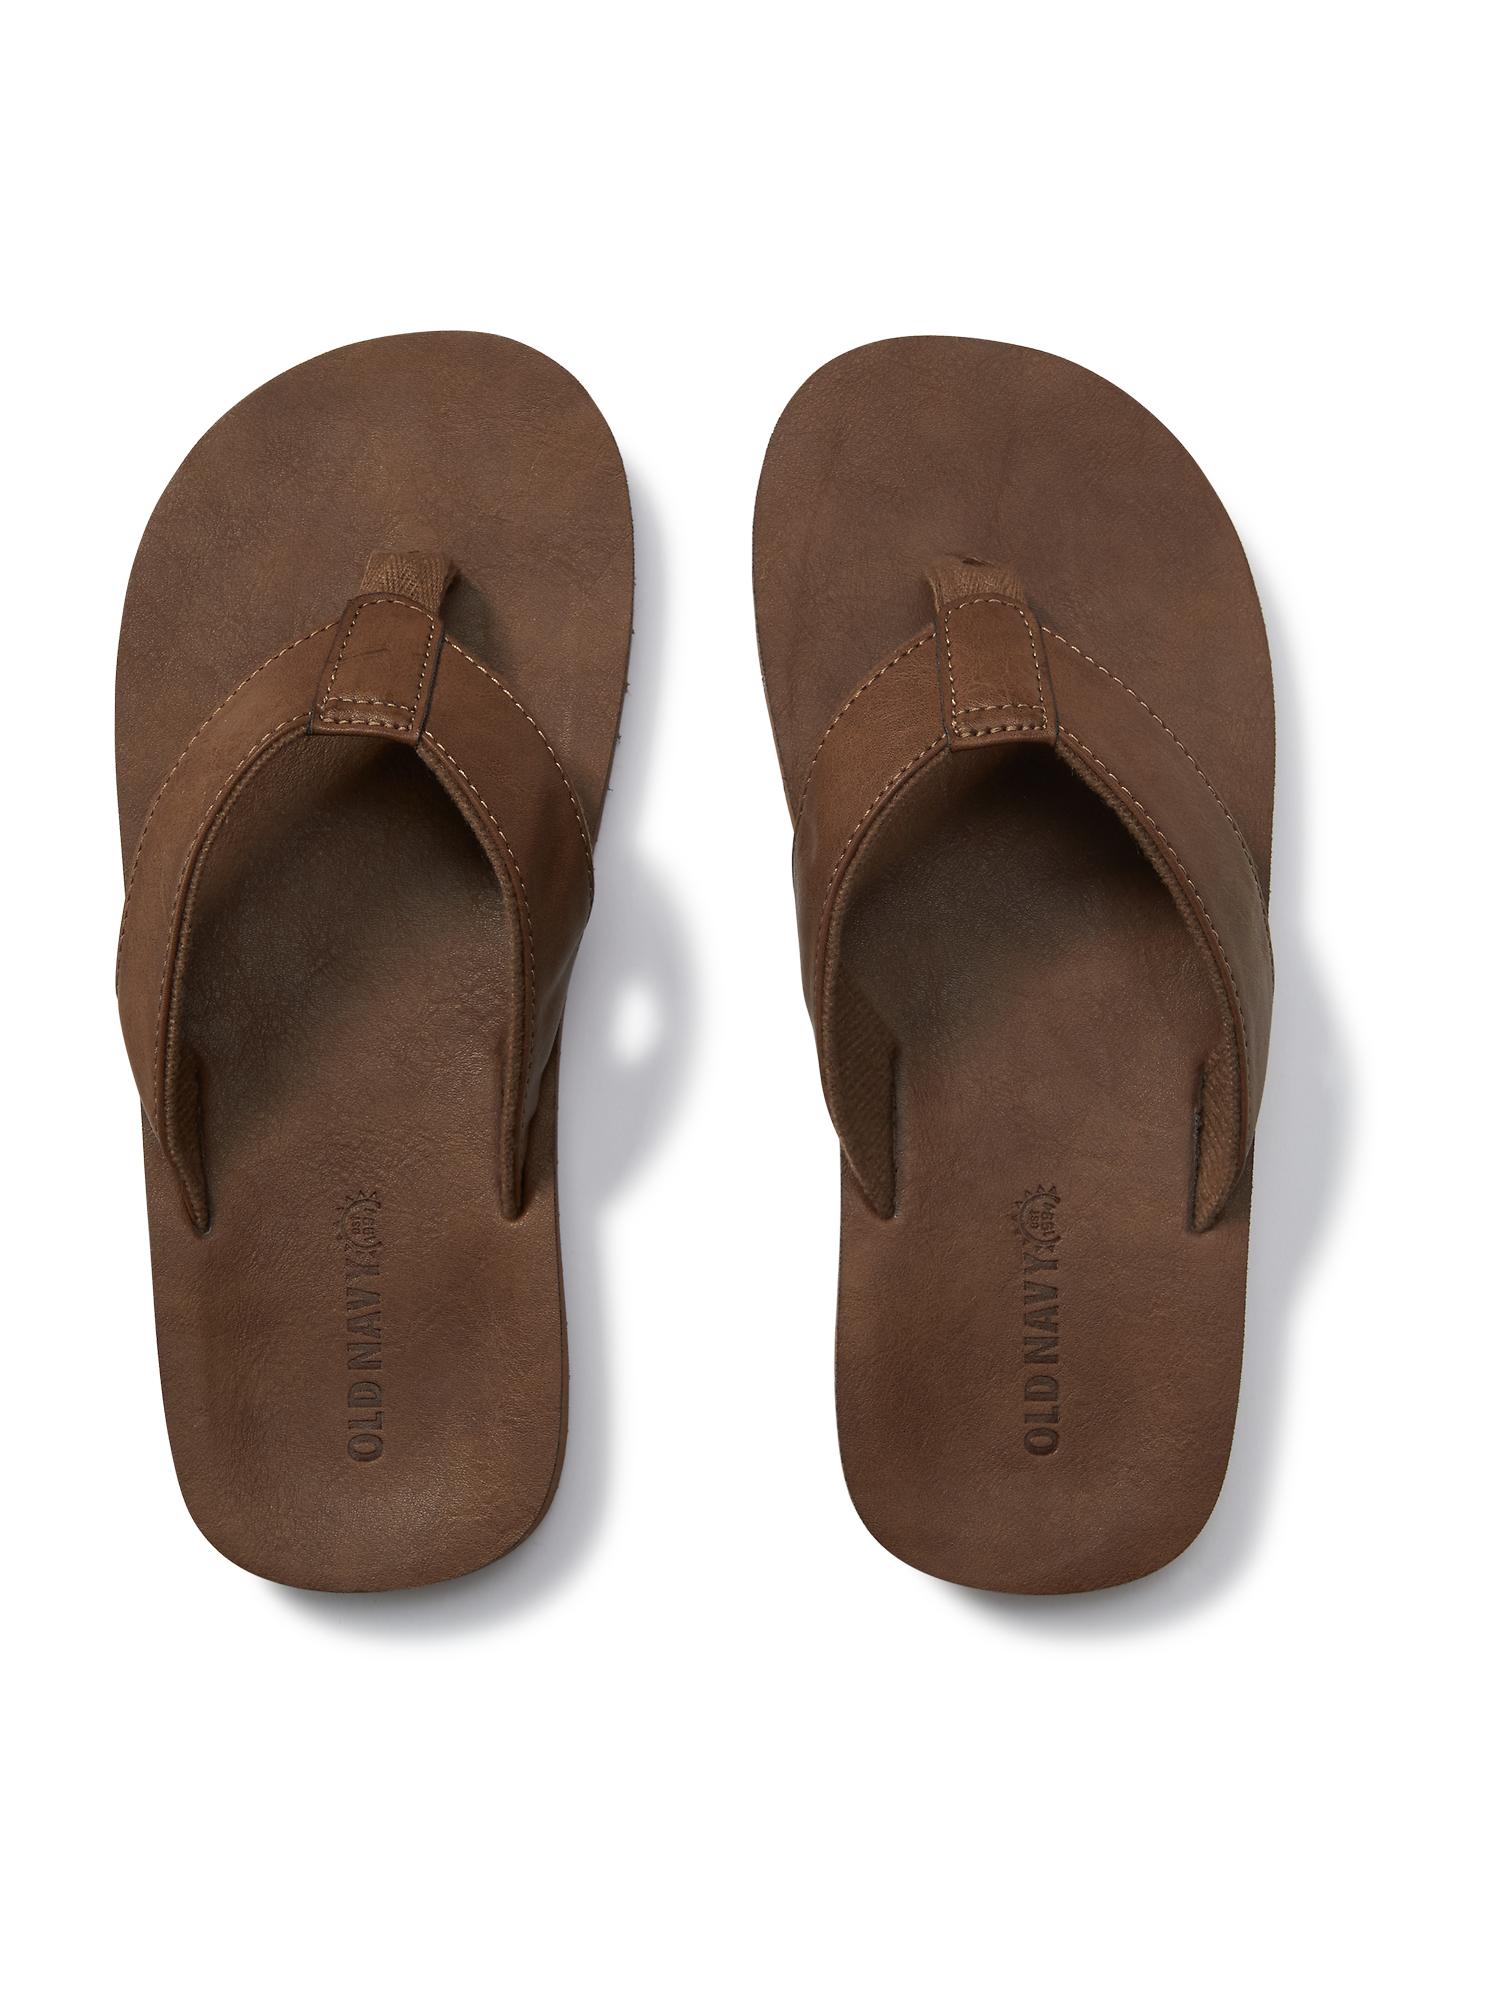 Buy Leather Boys Sandals Online In India - Etsy India-tmf.edu.vn